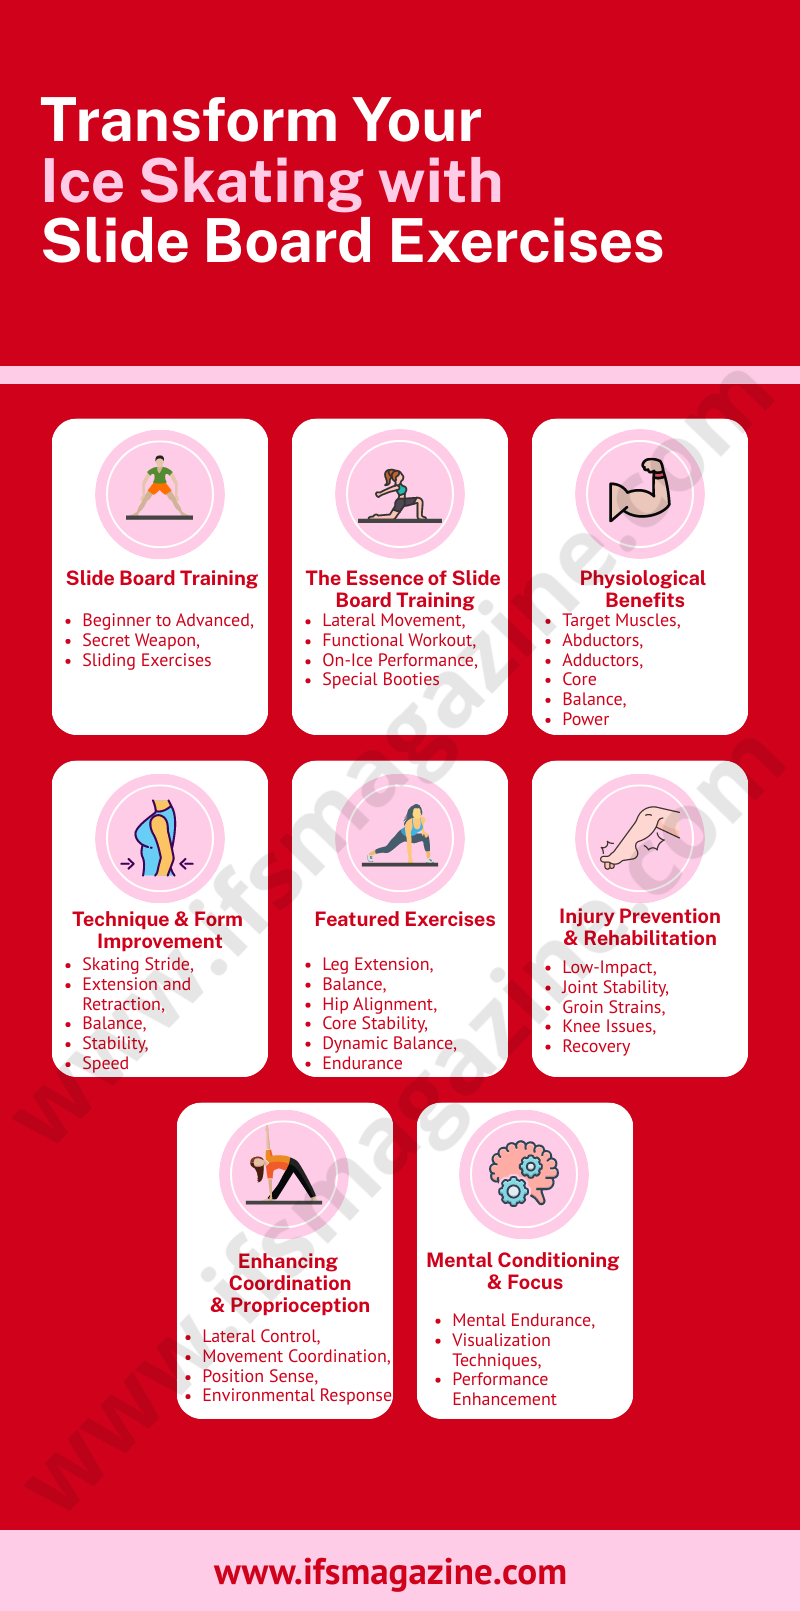 This infographic show  benefits of slide board for ice skating